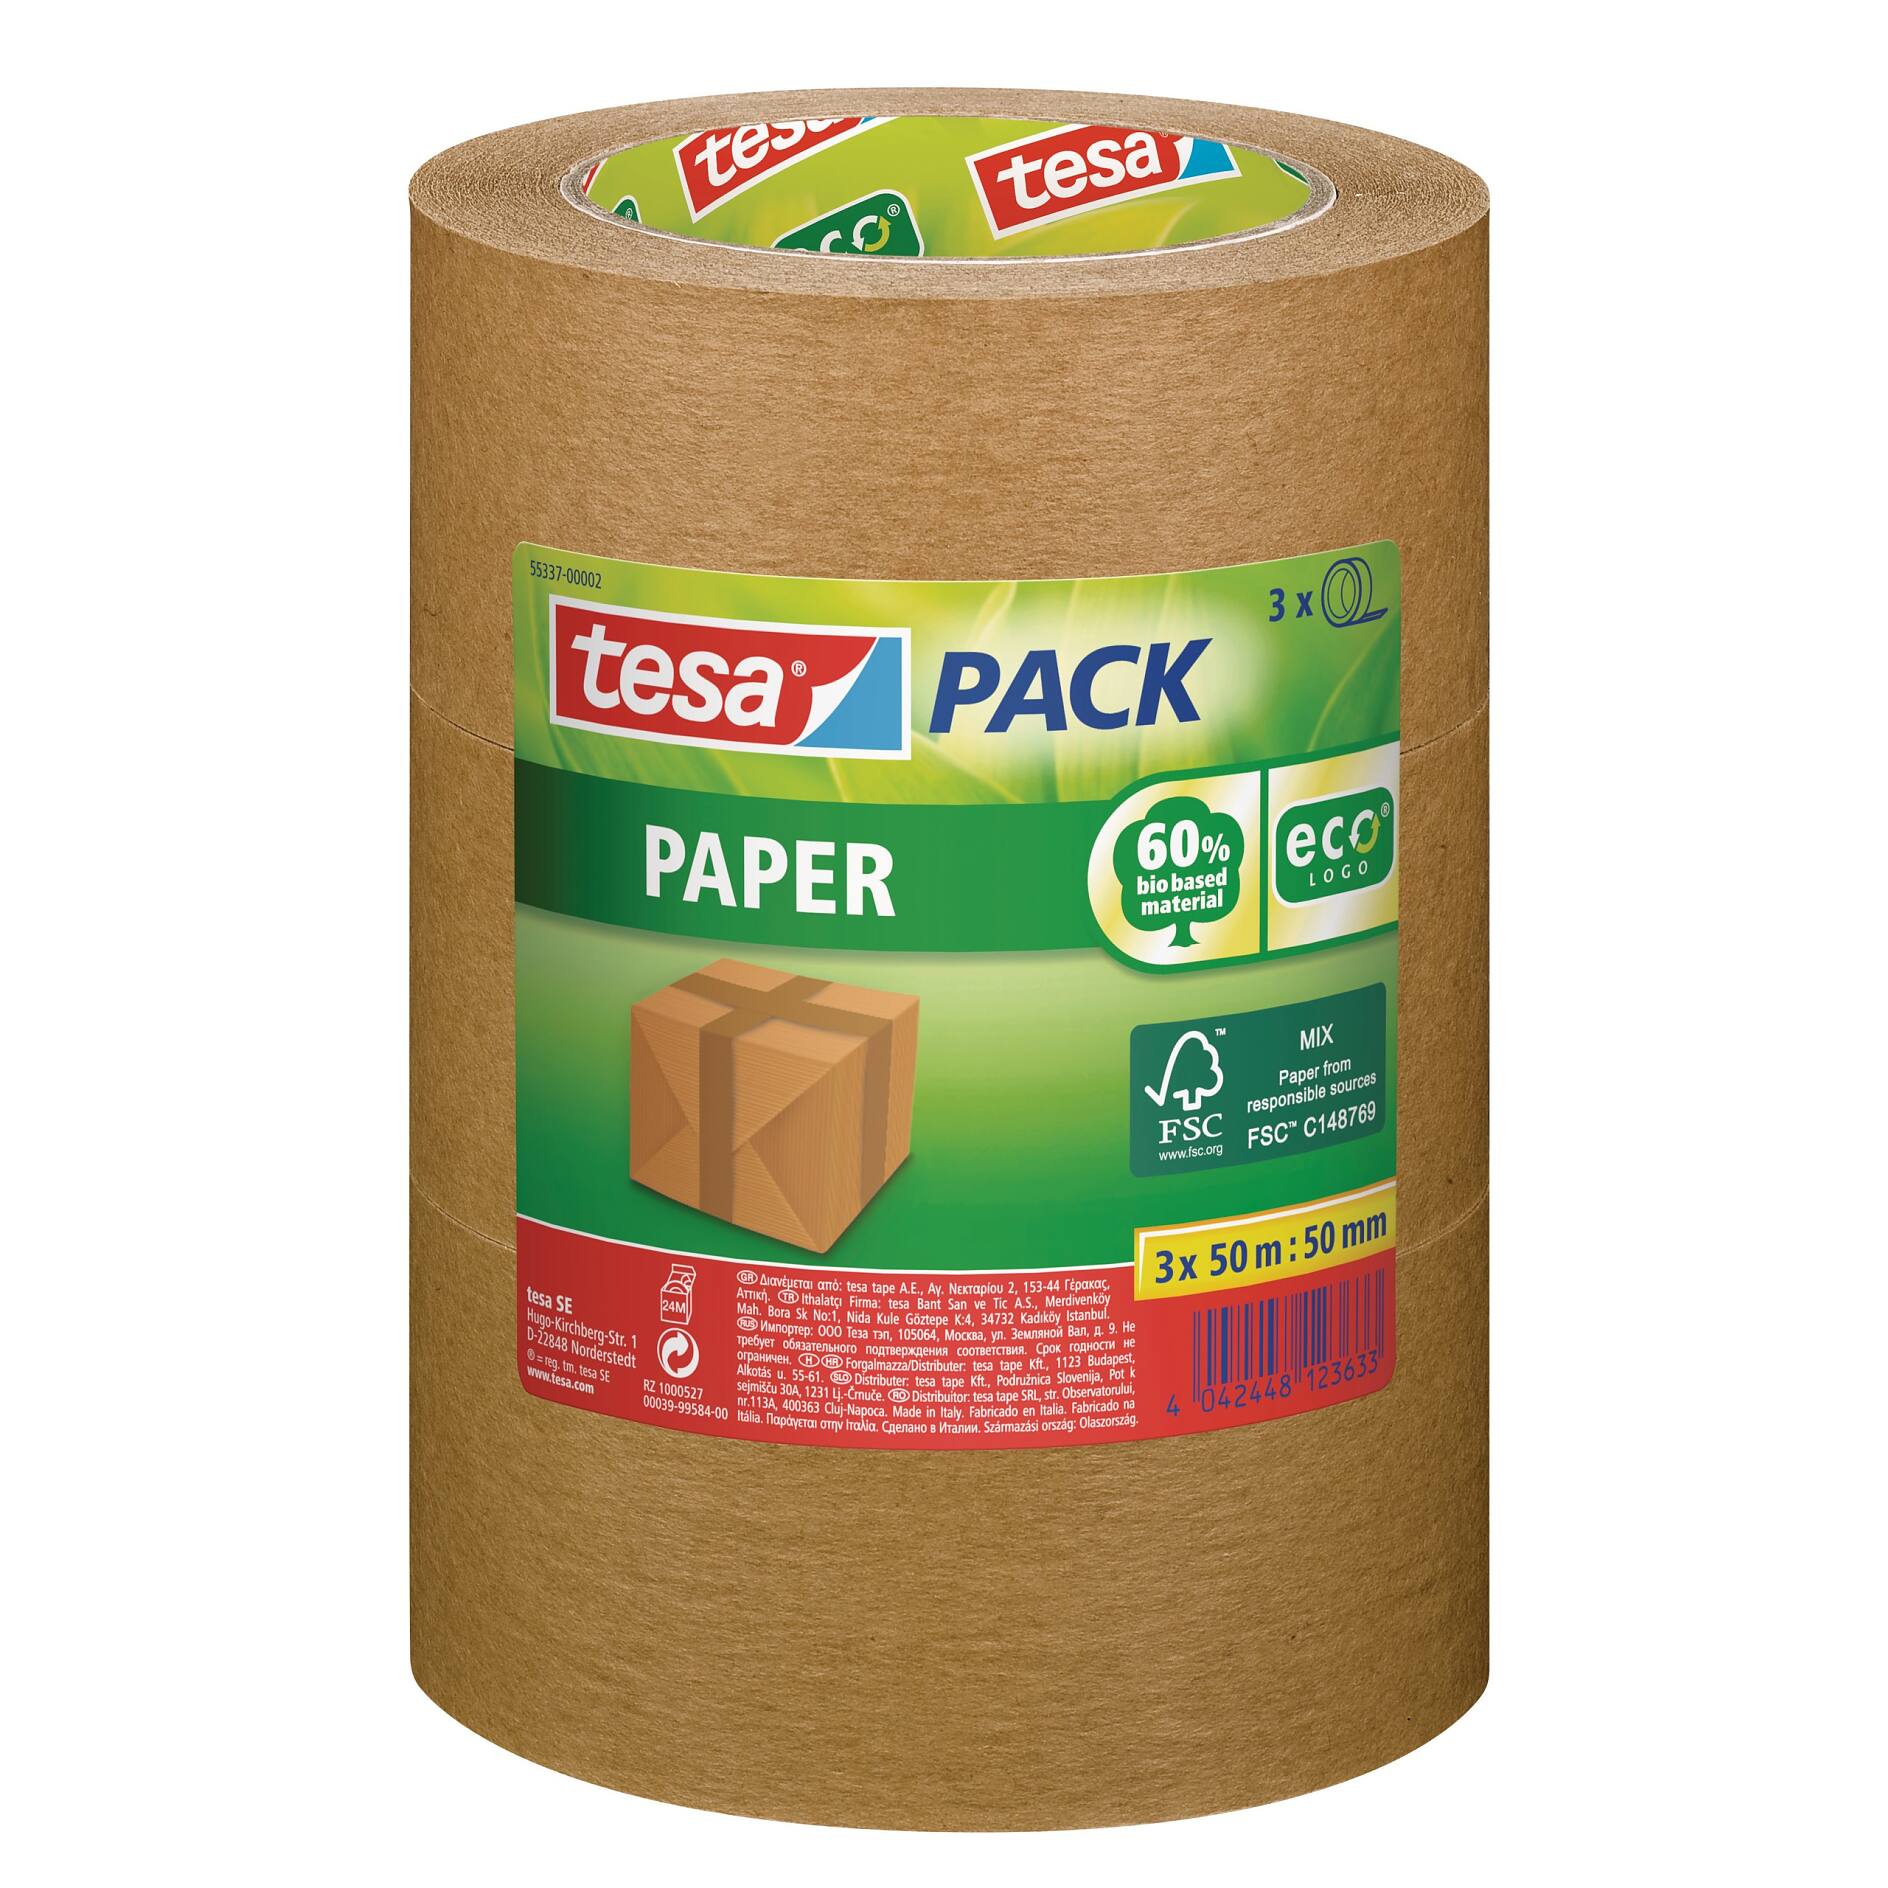 6M Honeycomb Packing Paper Roll,Eco Friendly Packing Paper for